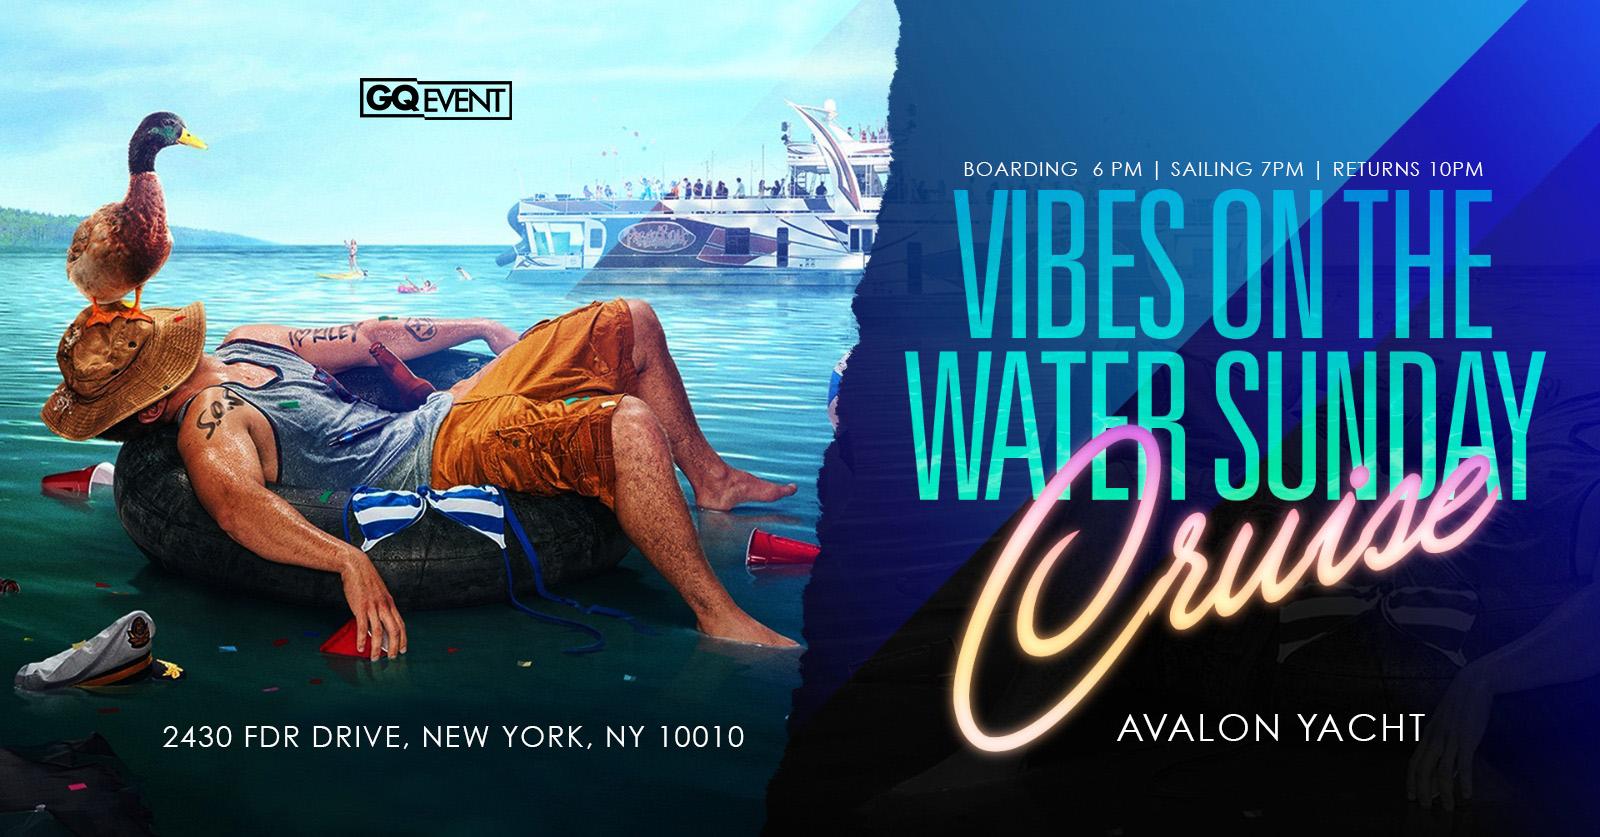 THE VIBES ON THE WATER SUNDAY YACHT #GQevent #GROUP